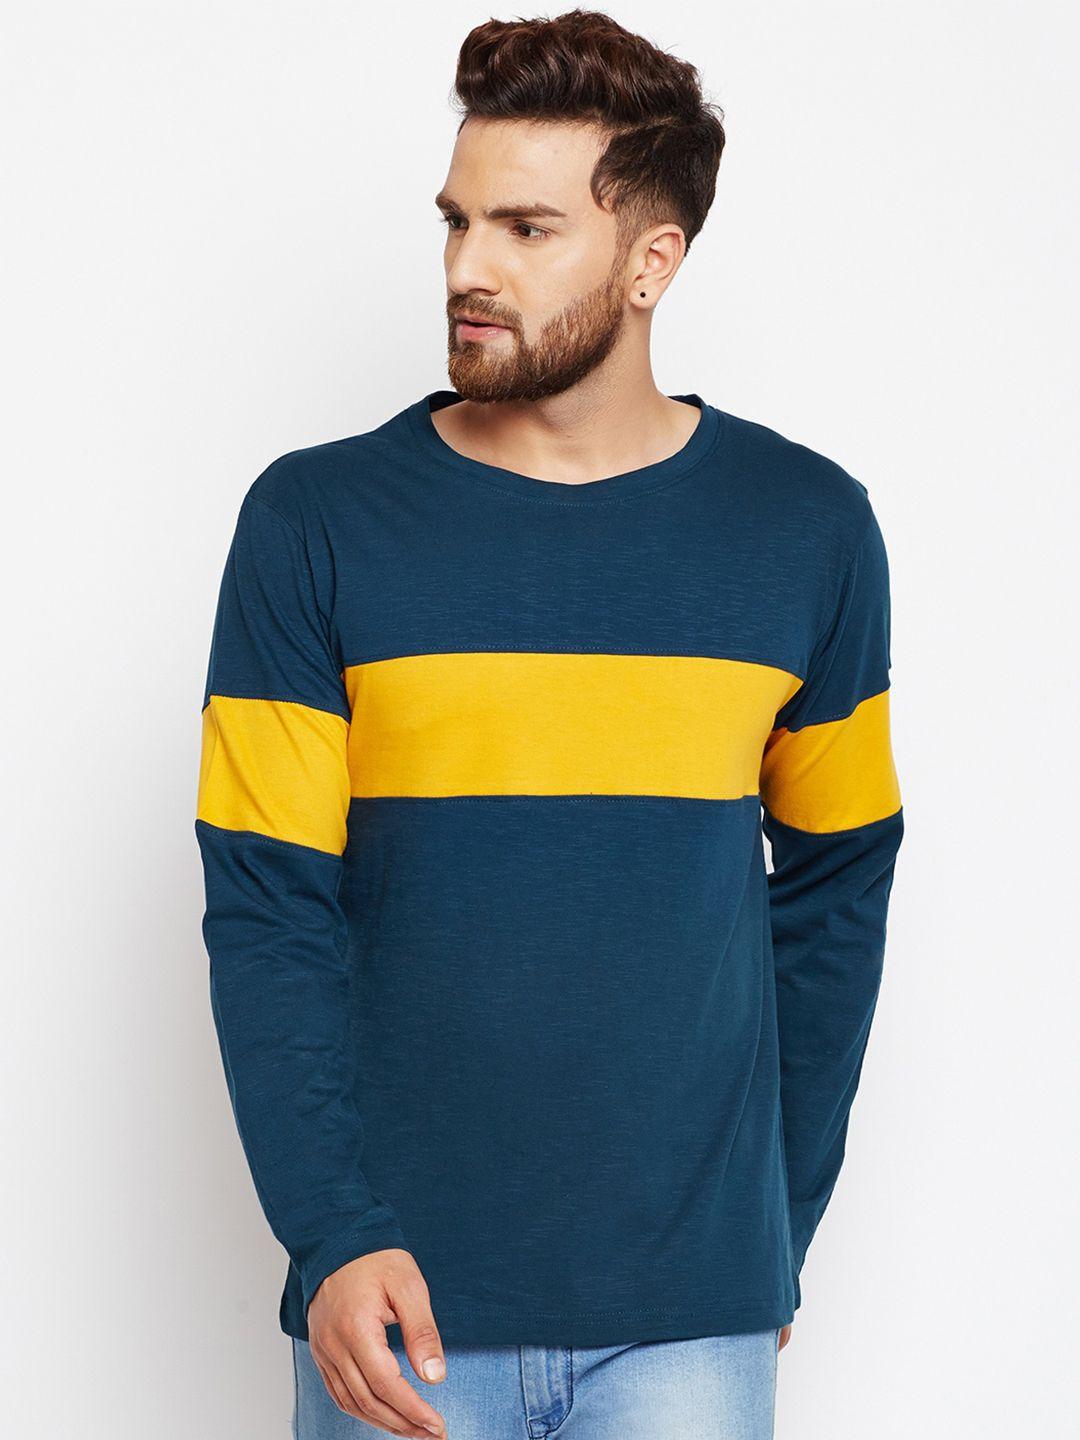 the-dry-state-men-colourblocked-long-sleeve-cotton-t-shirt